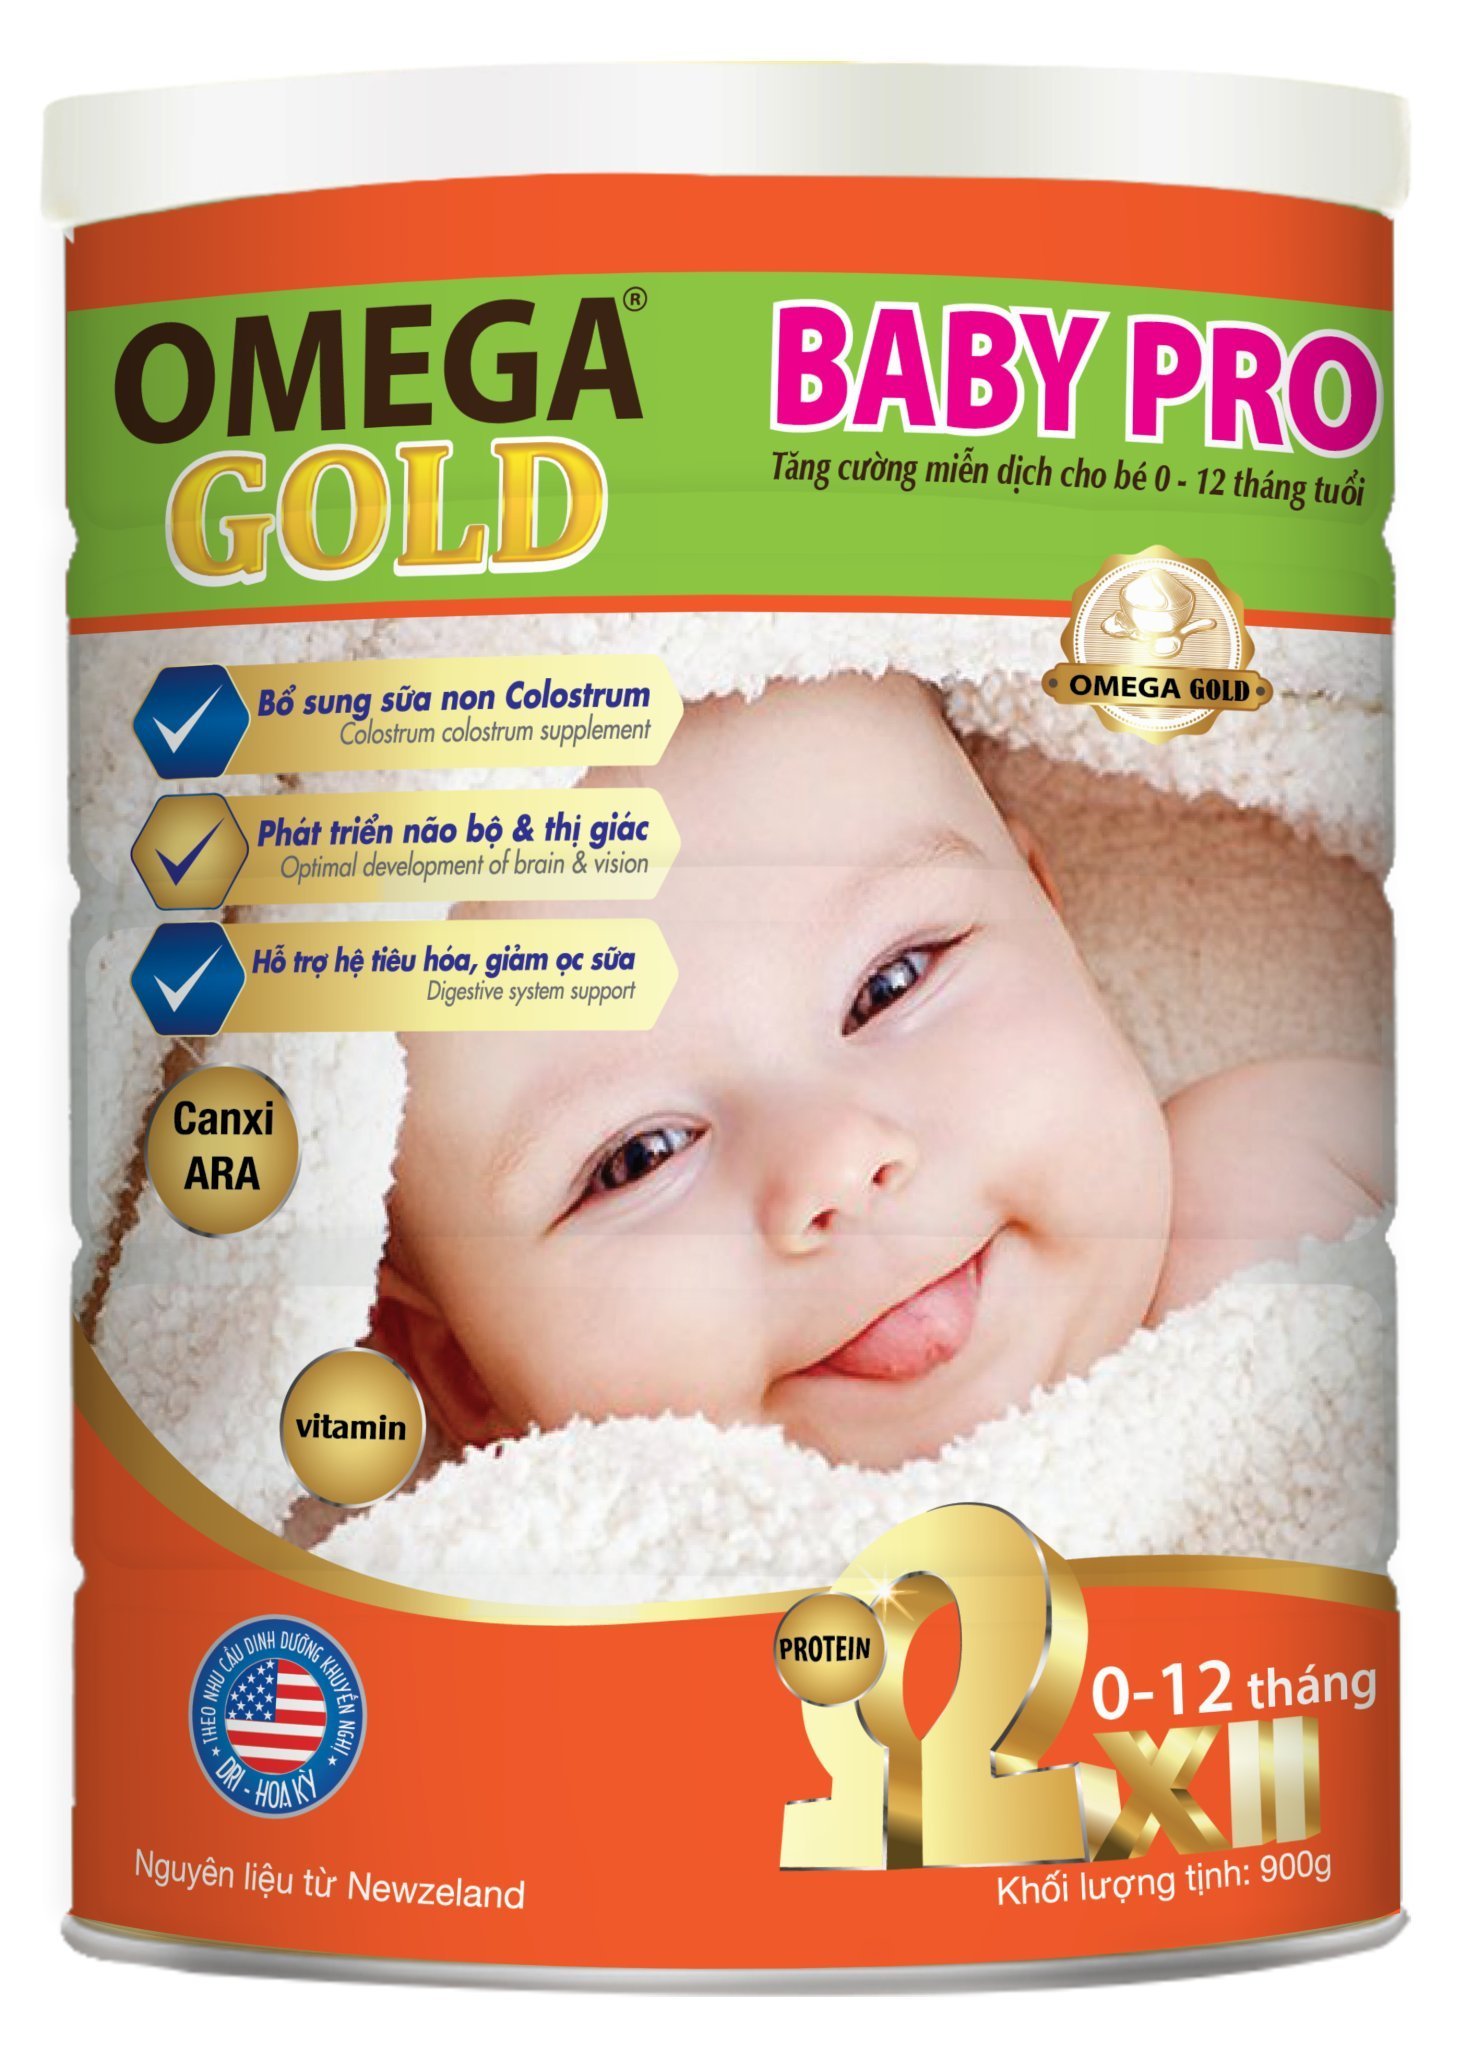 Sữa Bột OMEGA GOLD BABY PRO